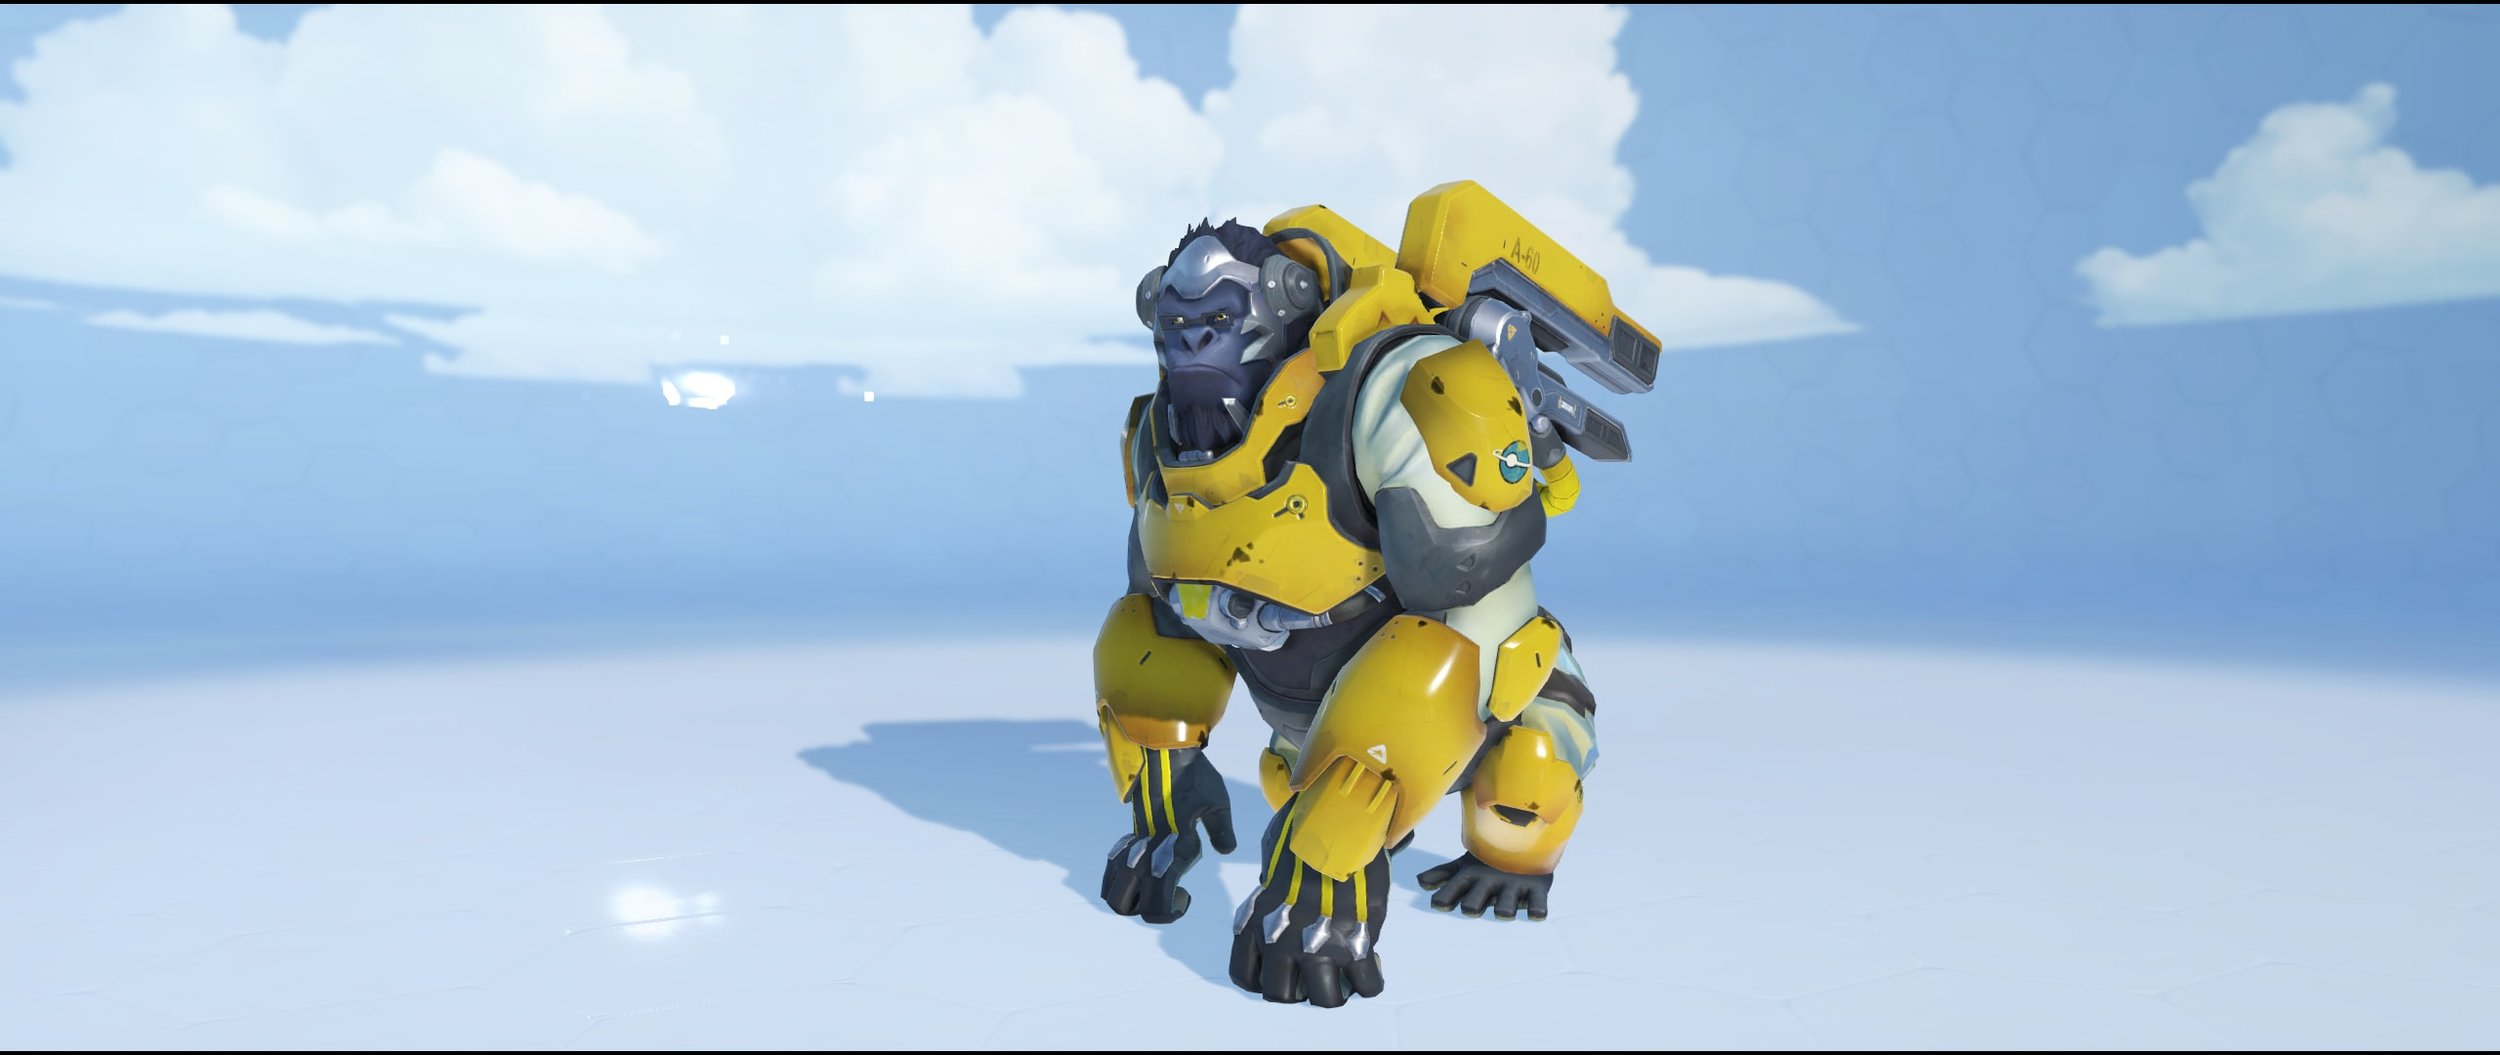 Winston S Hero And Gun Skins All Events Included Esports Tales